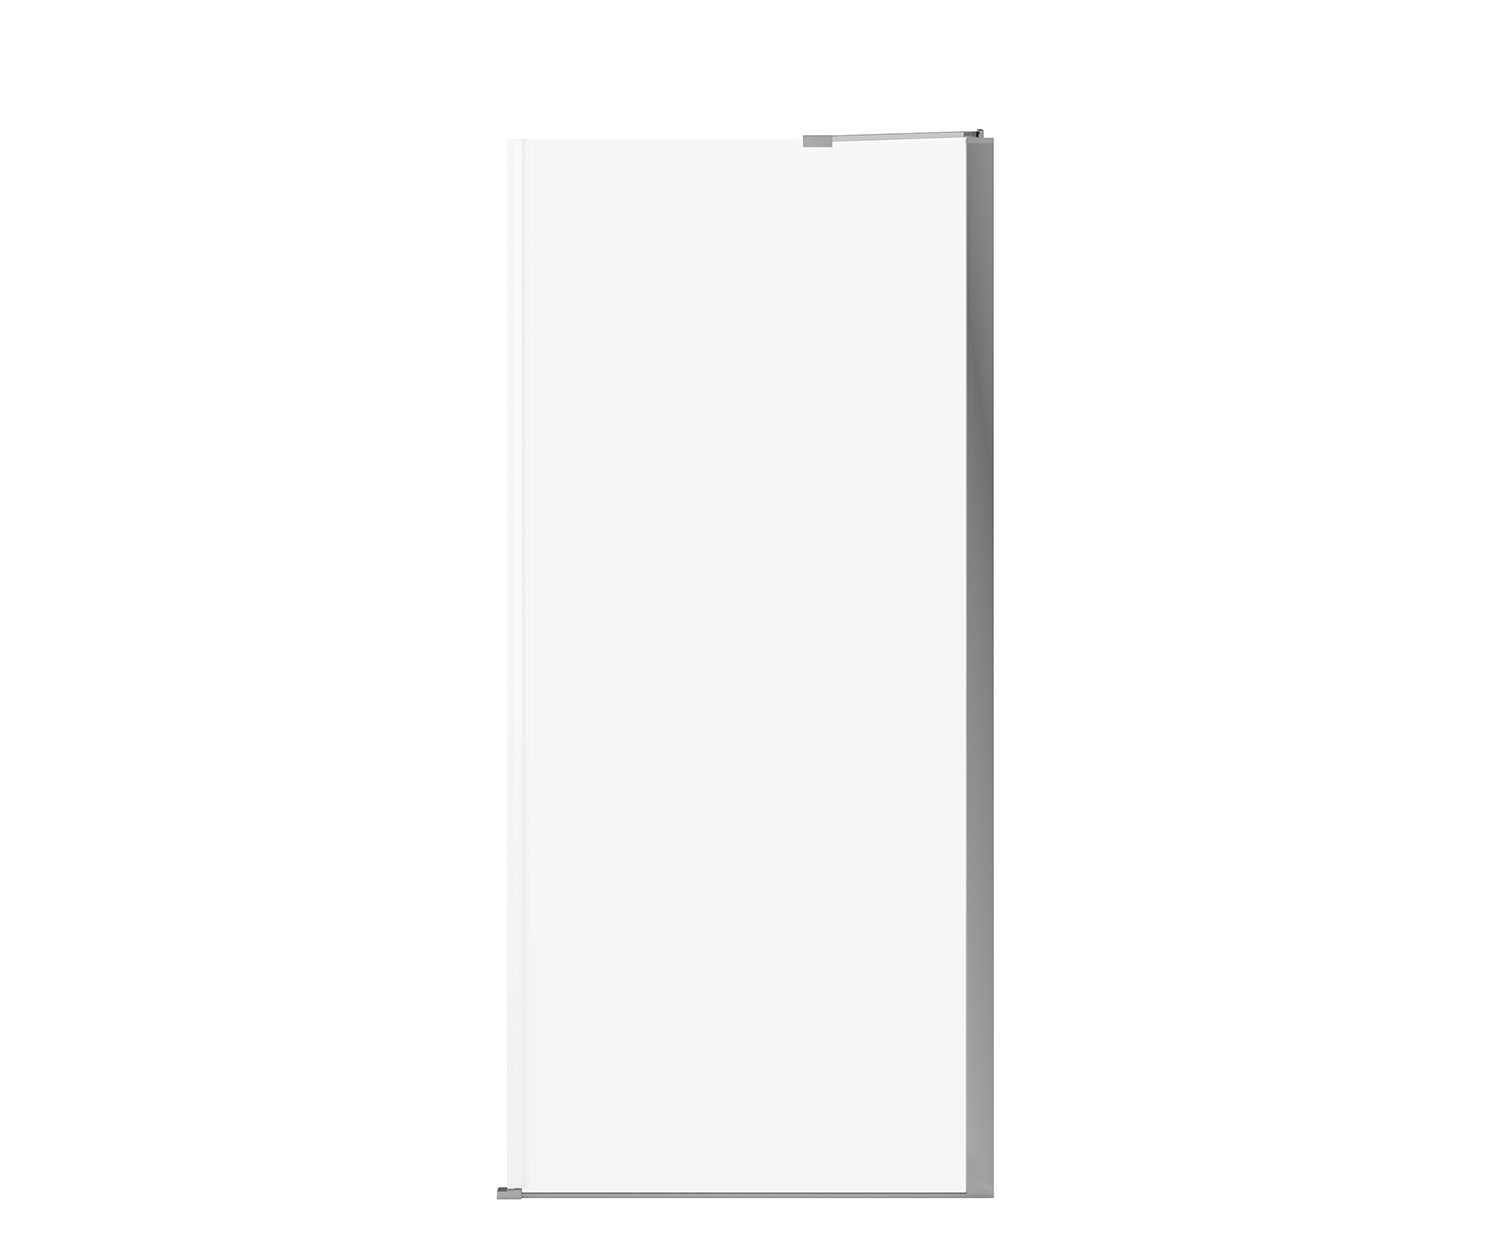 Reveal Sleek 71 Return Panel for 36 in. Base with Clear glass in 